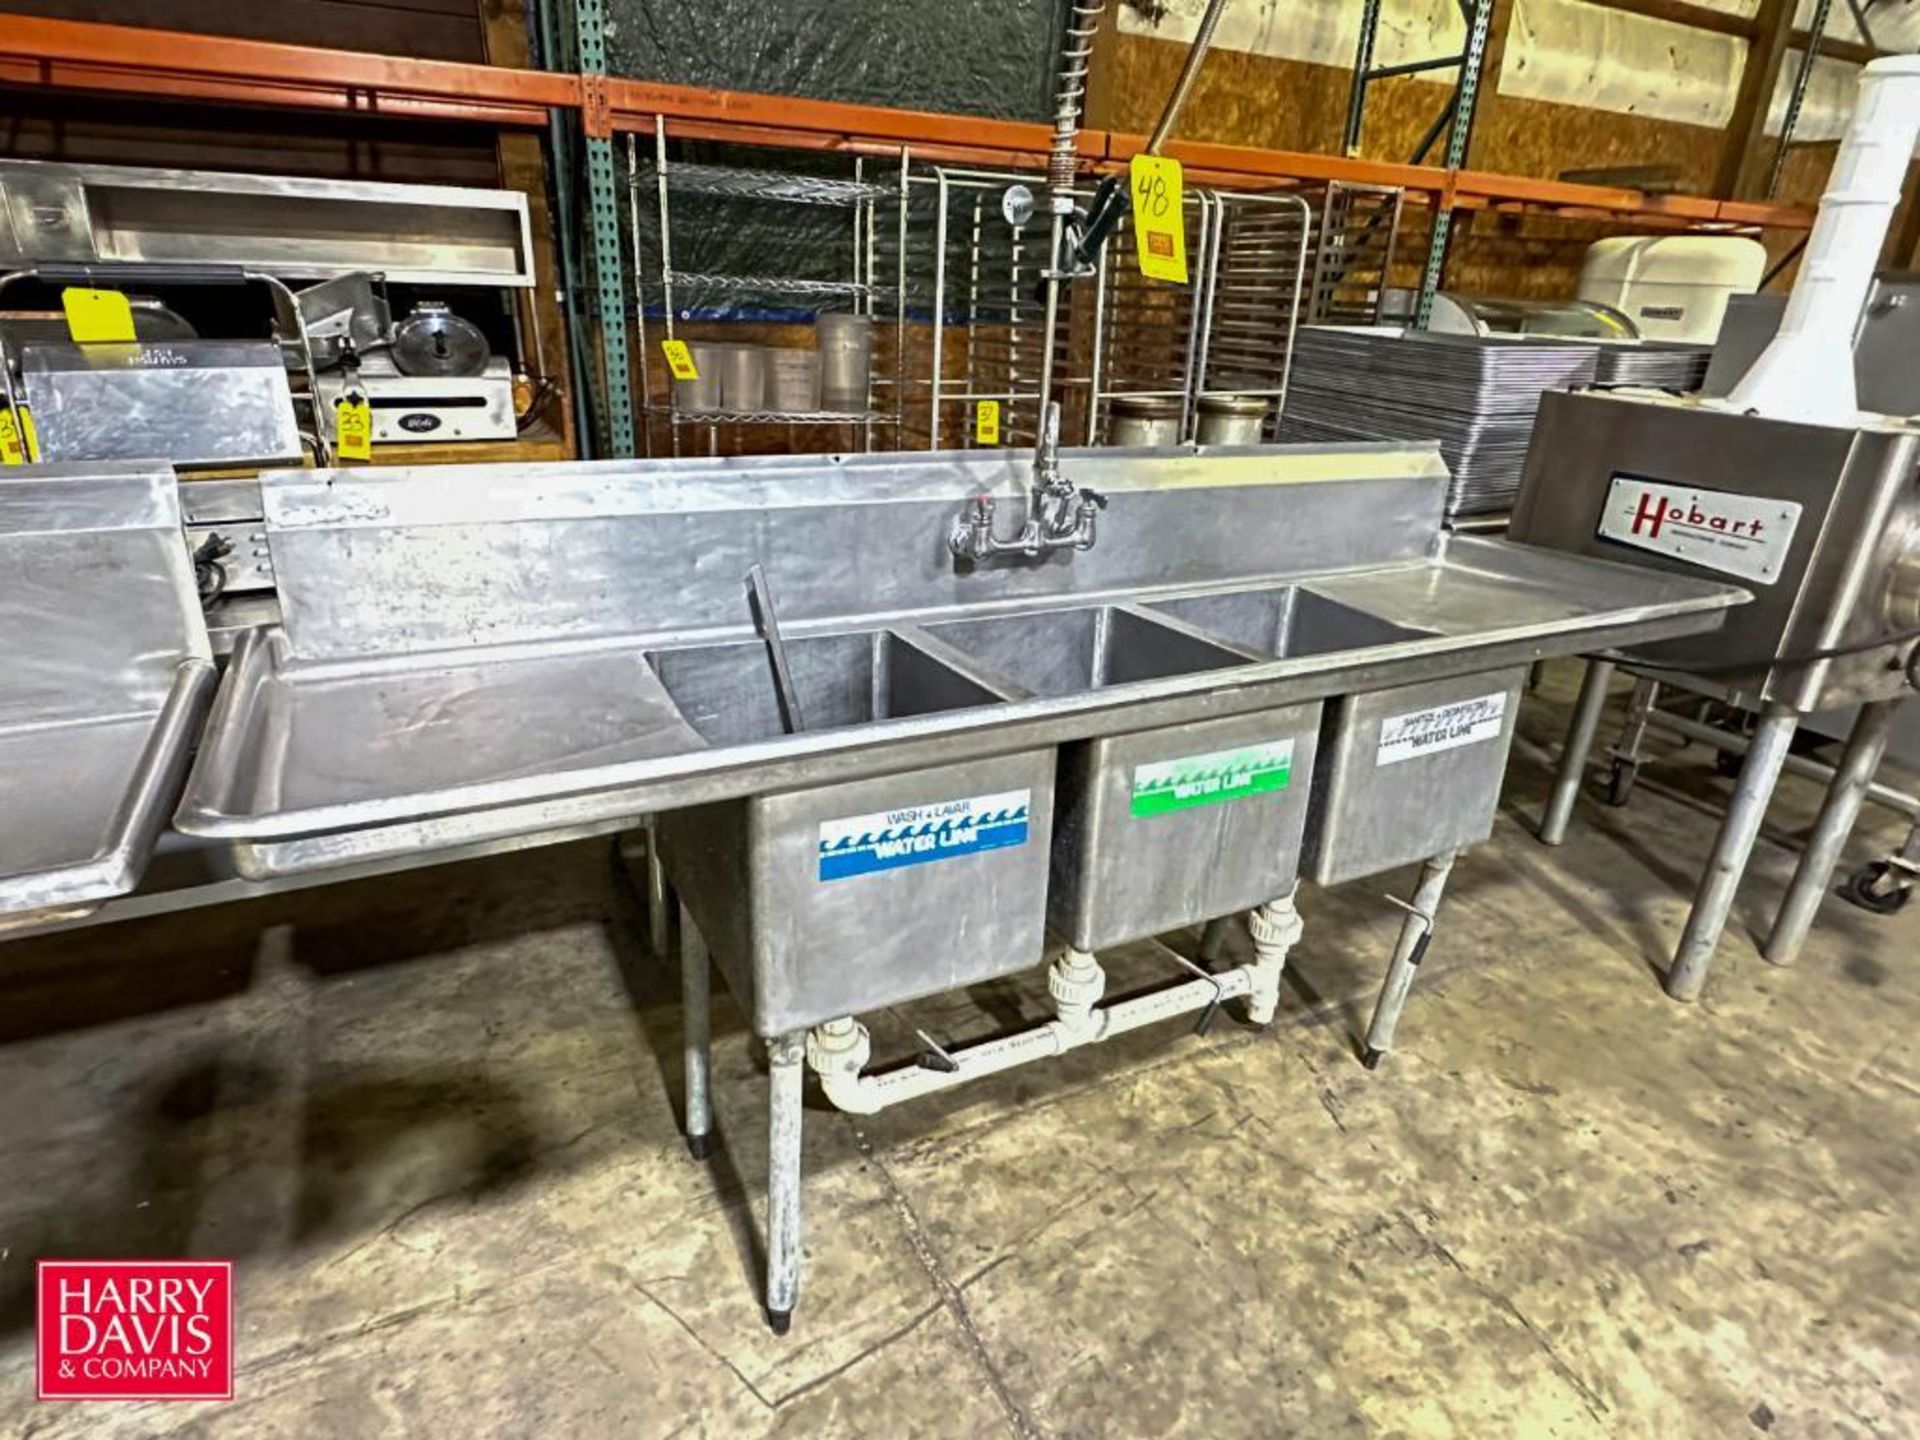 S/S Triple Bowl S/S Sink with Spray Head: 27” Width x 90” Length - Rigging Fee: $150